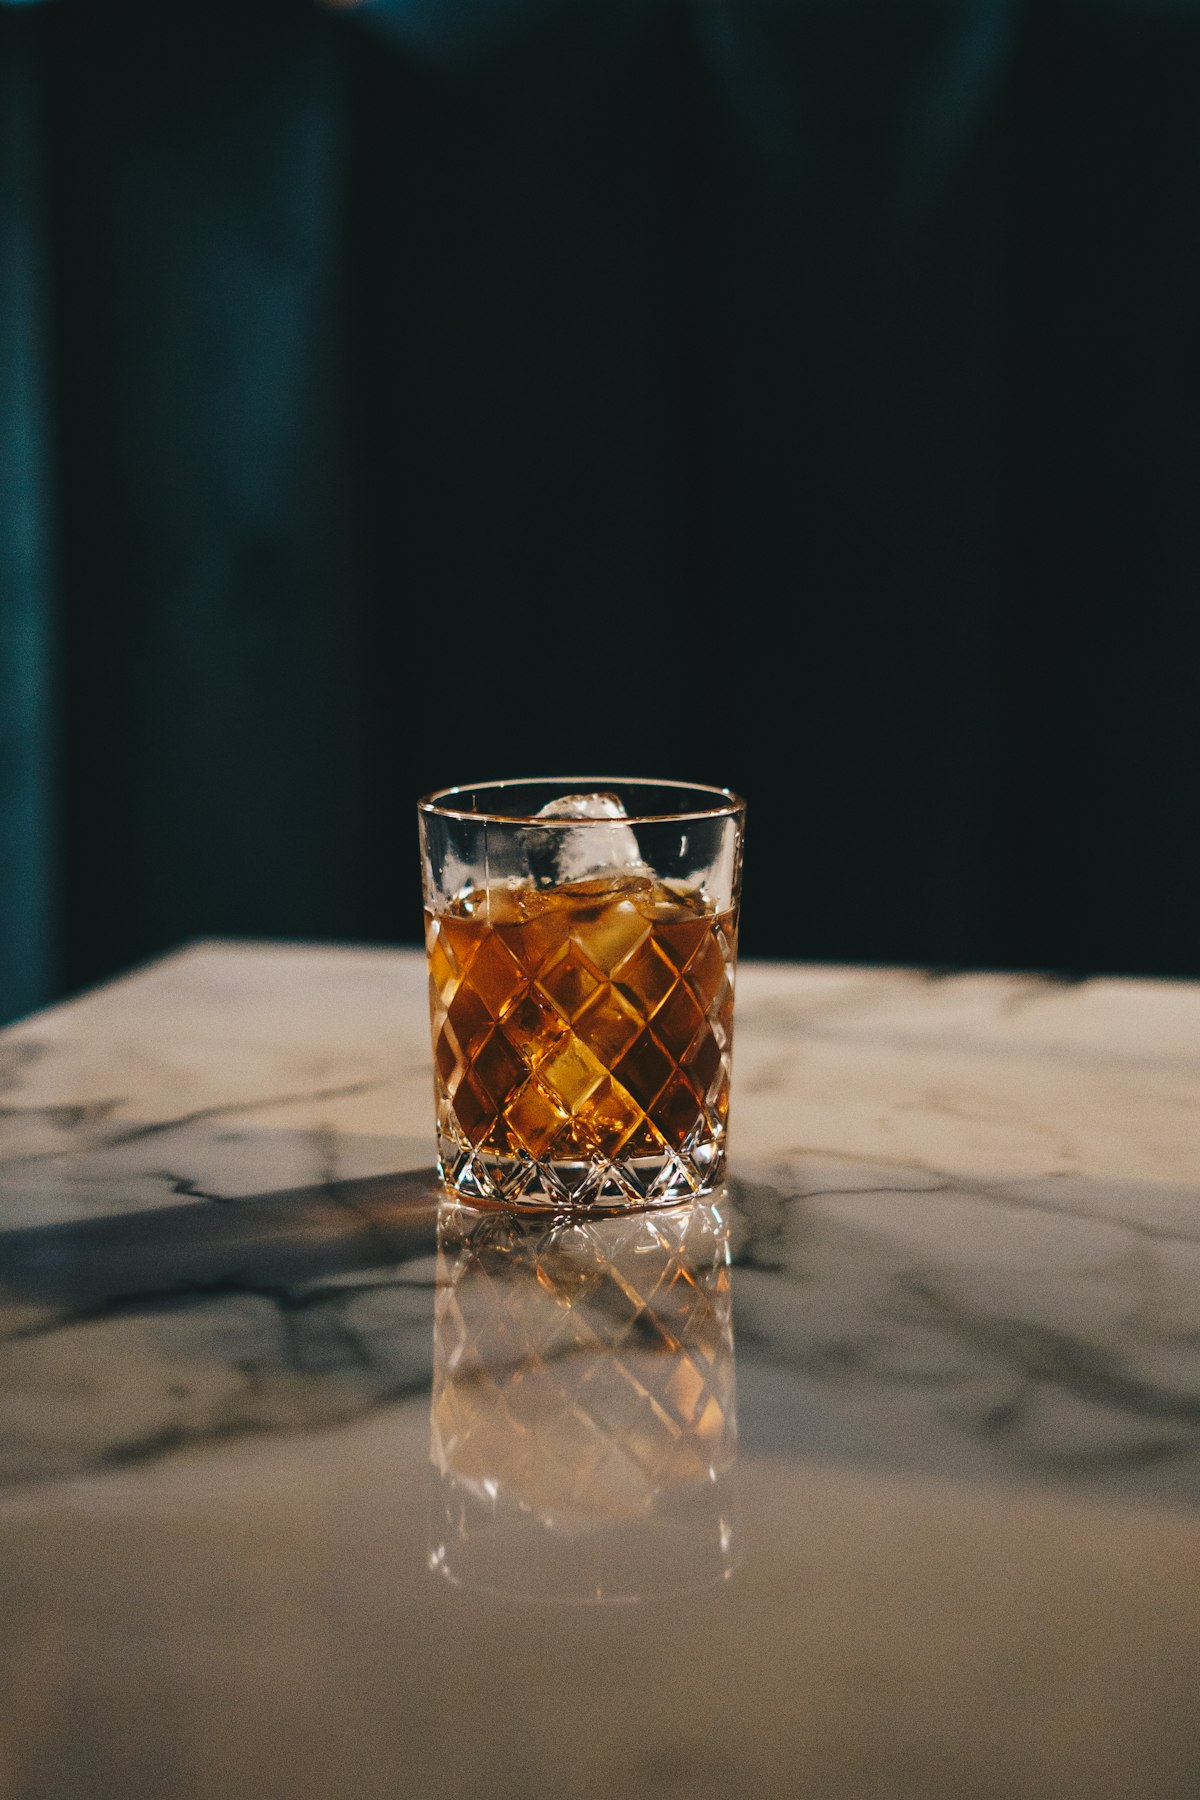 Whiskey glass with beverage and ice on granite countertop